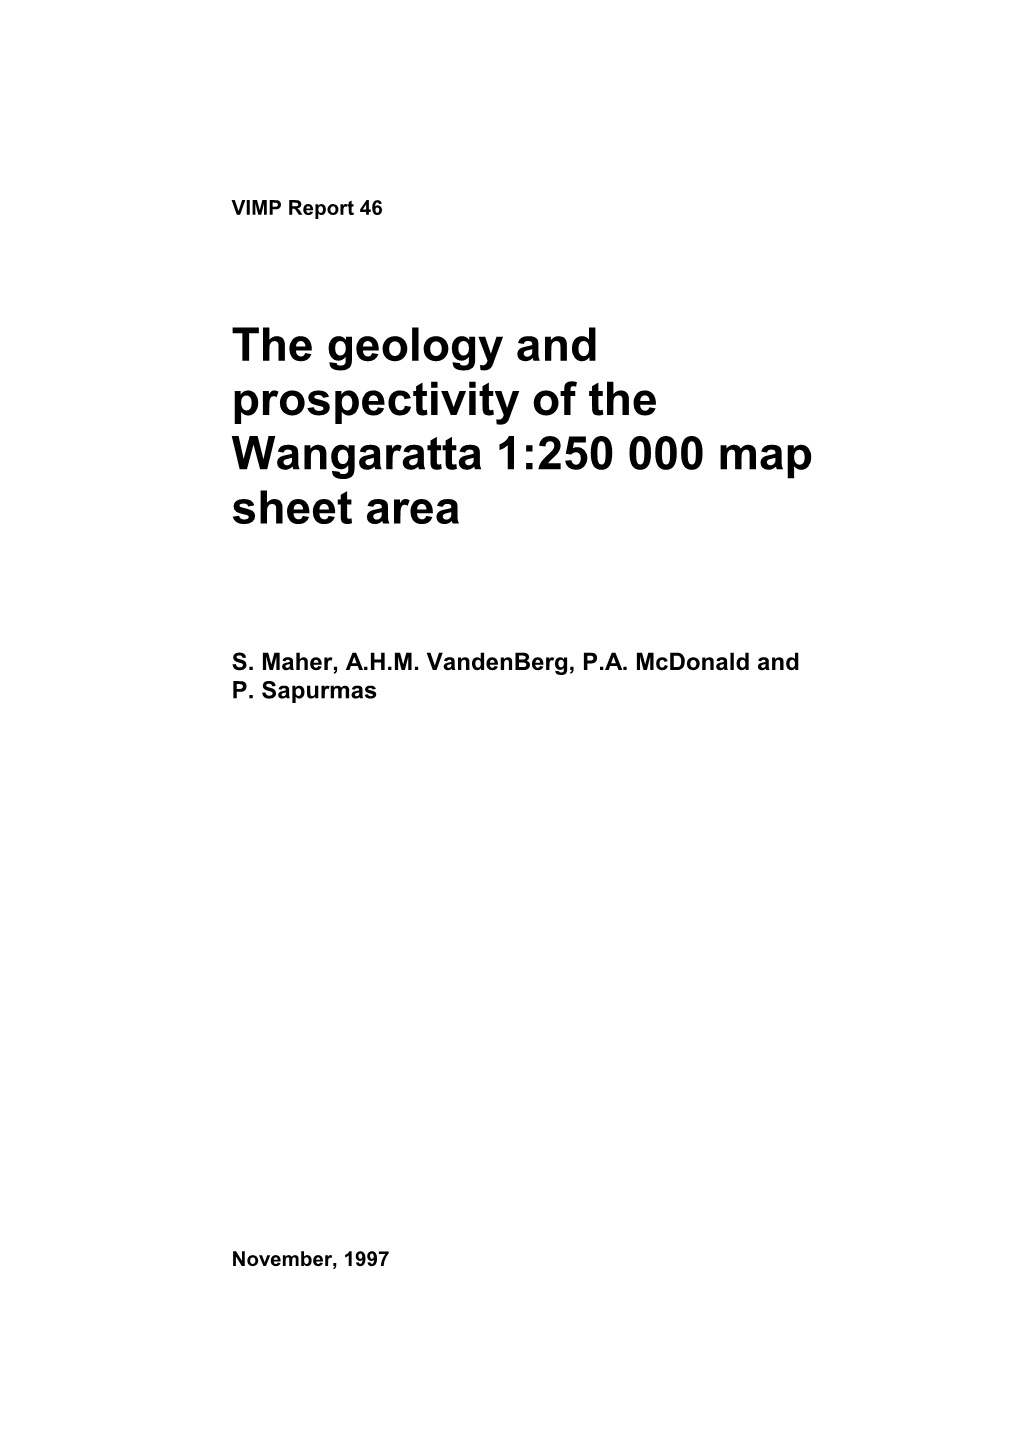 The Geology and Prospectivity of the Wangaratta 1:250 000 Map Sheet Area